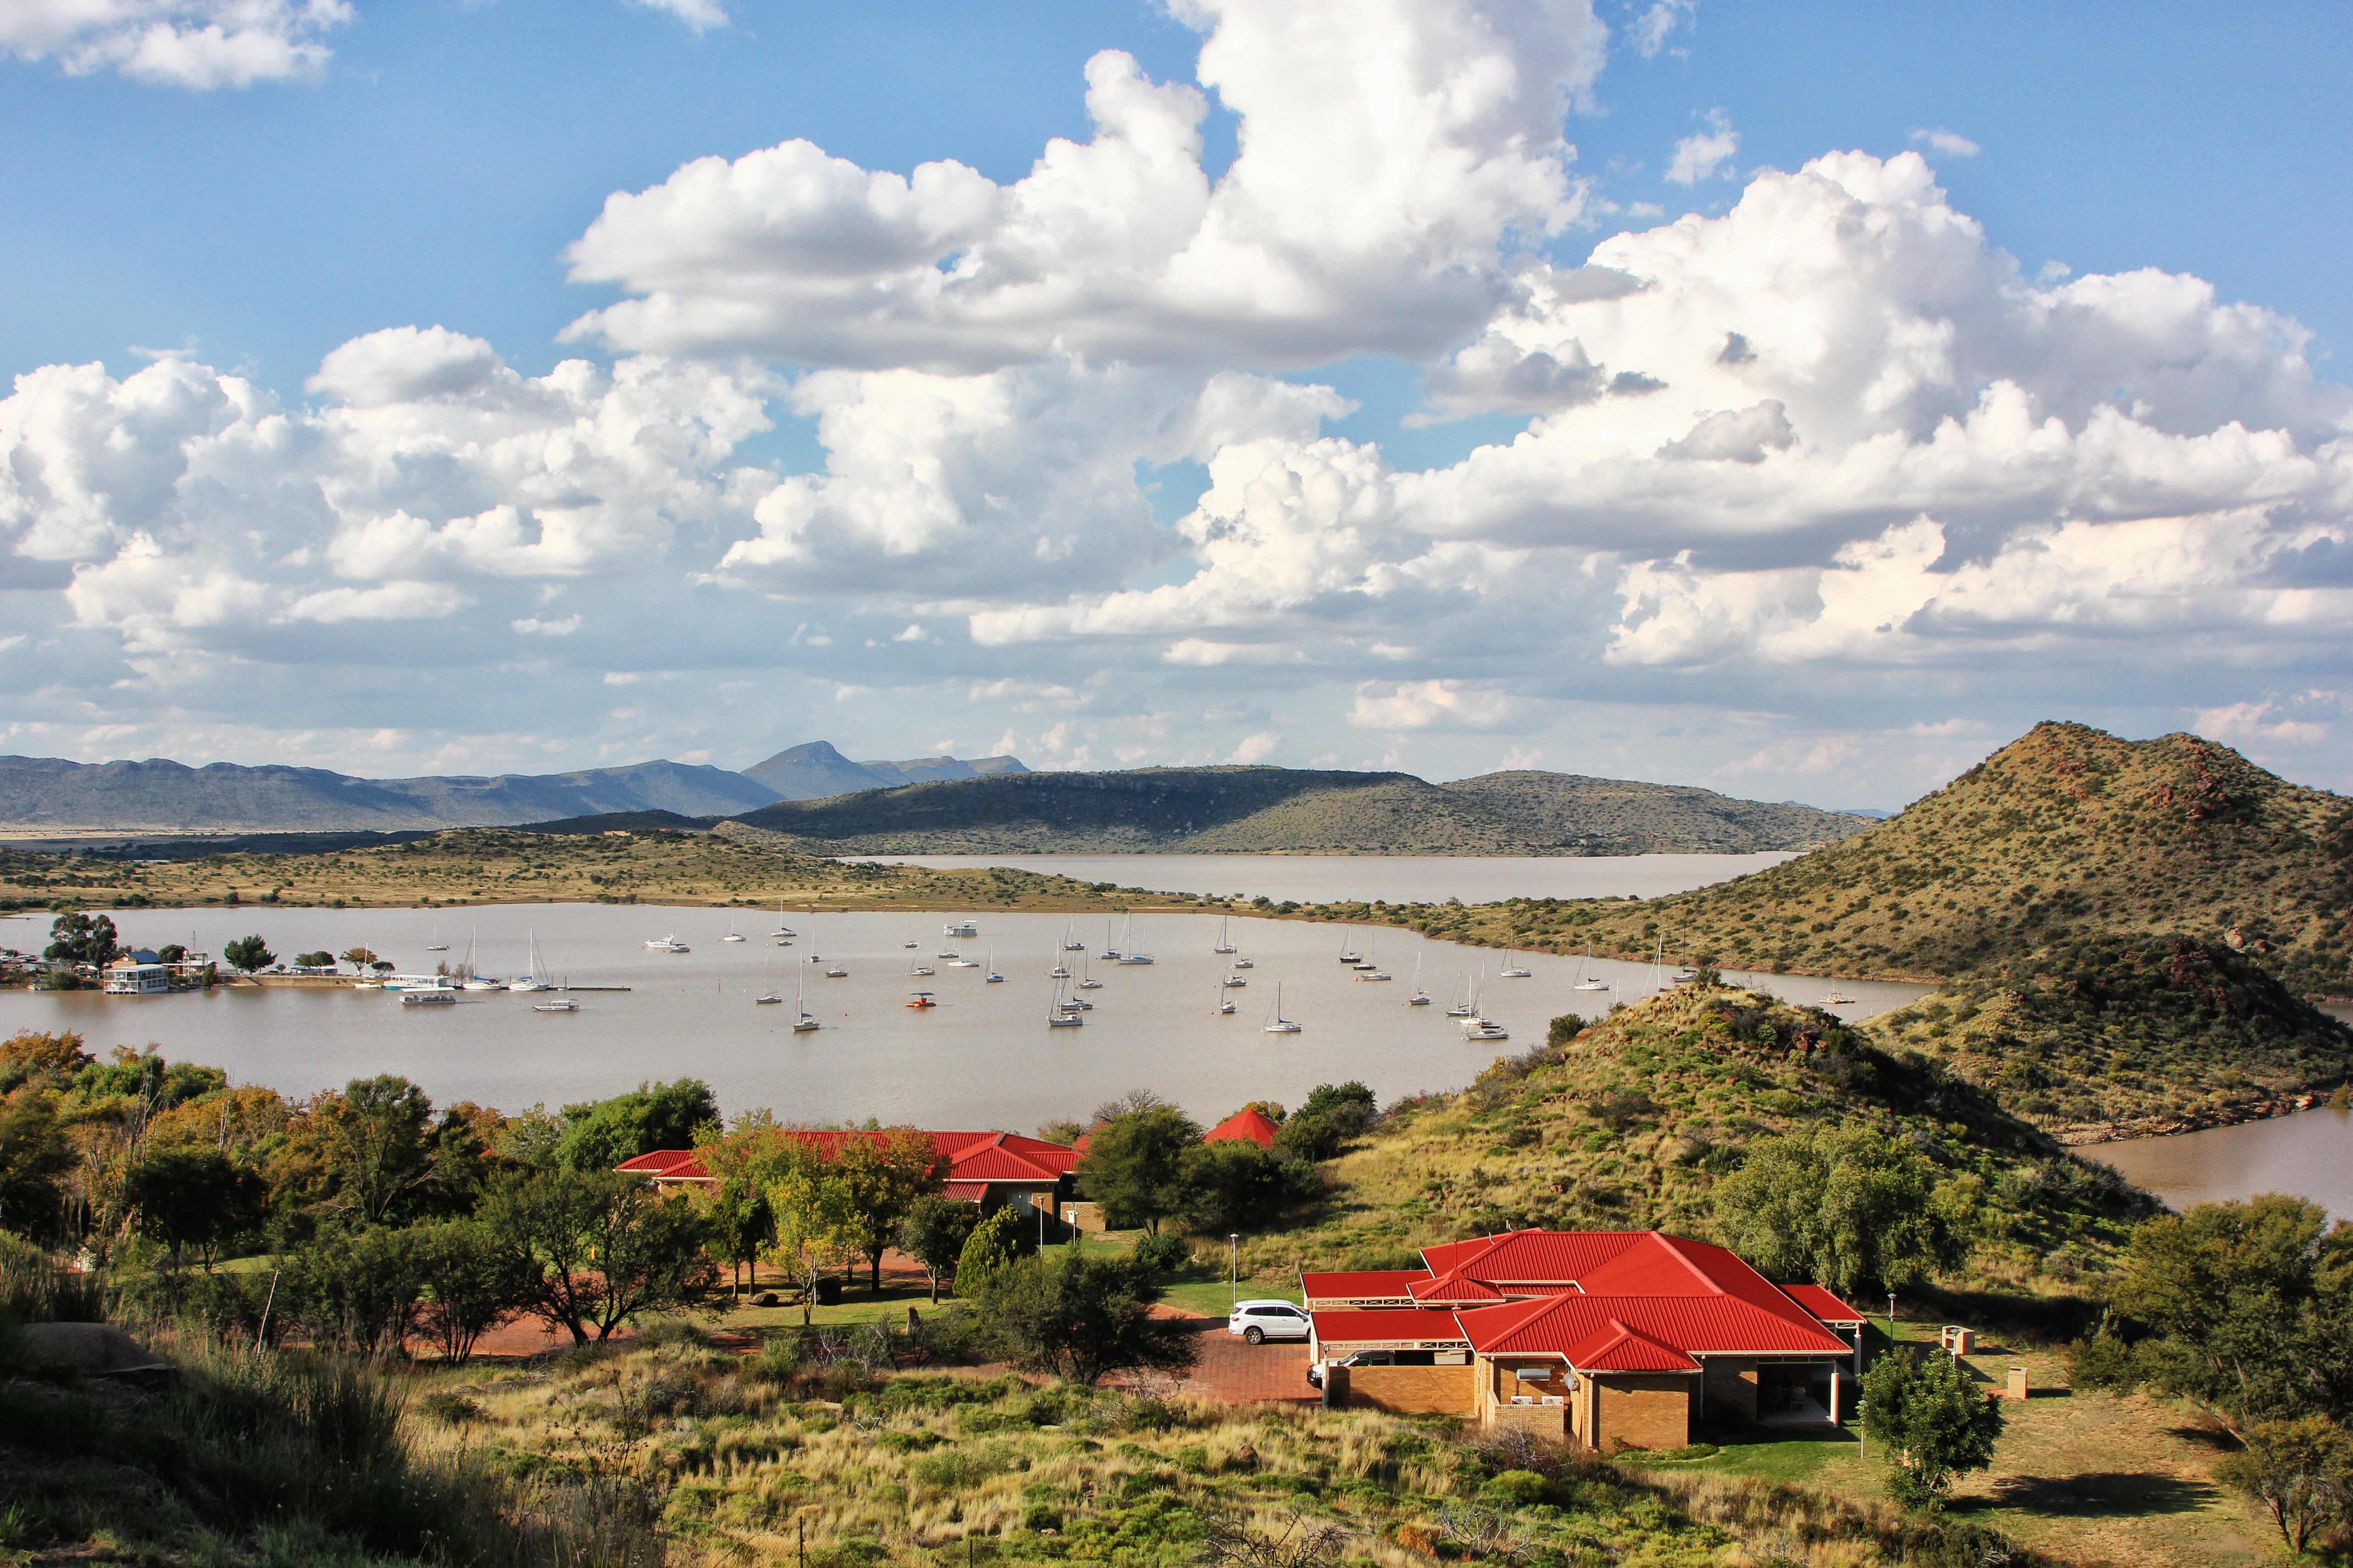 The distinctive red roofs of the Gariep Forever Resort. Image: Chris Marais